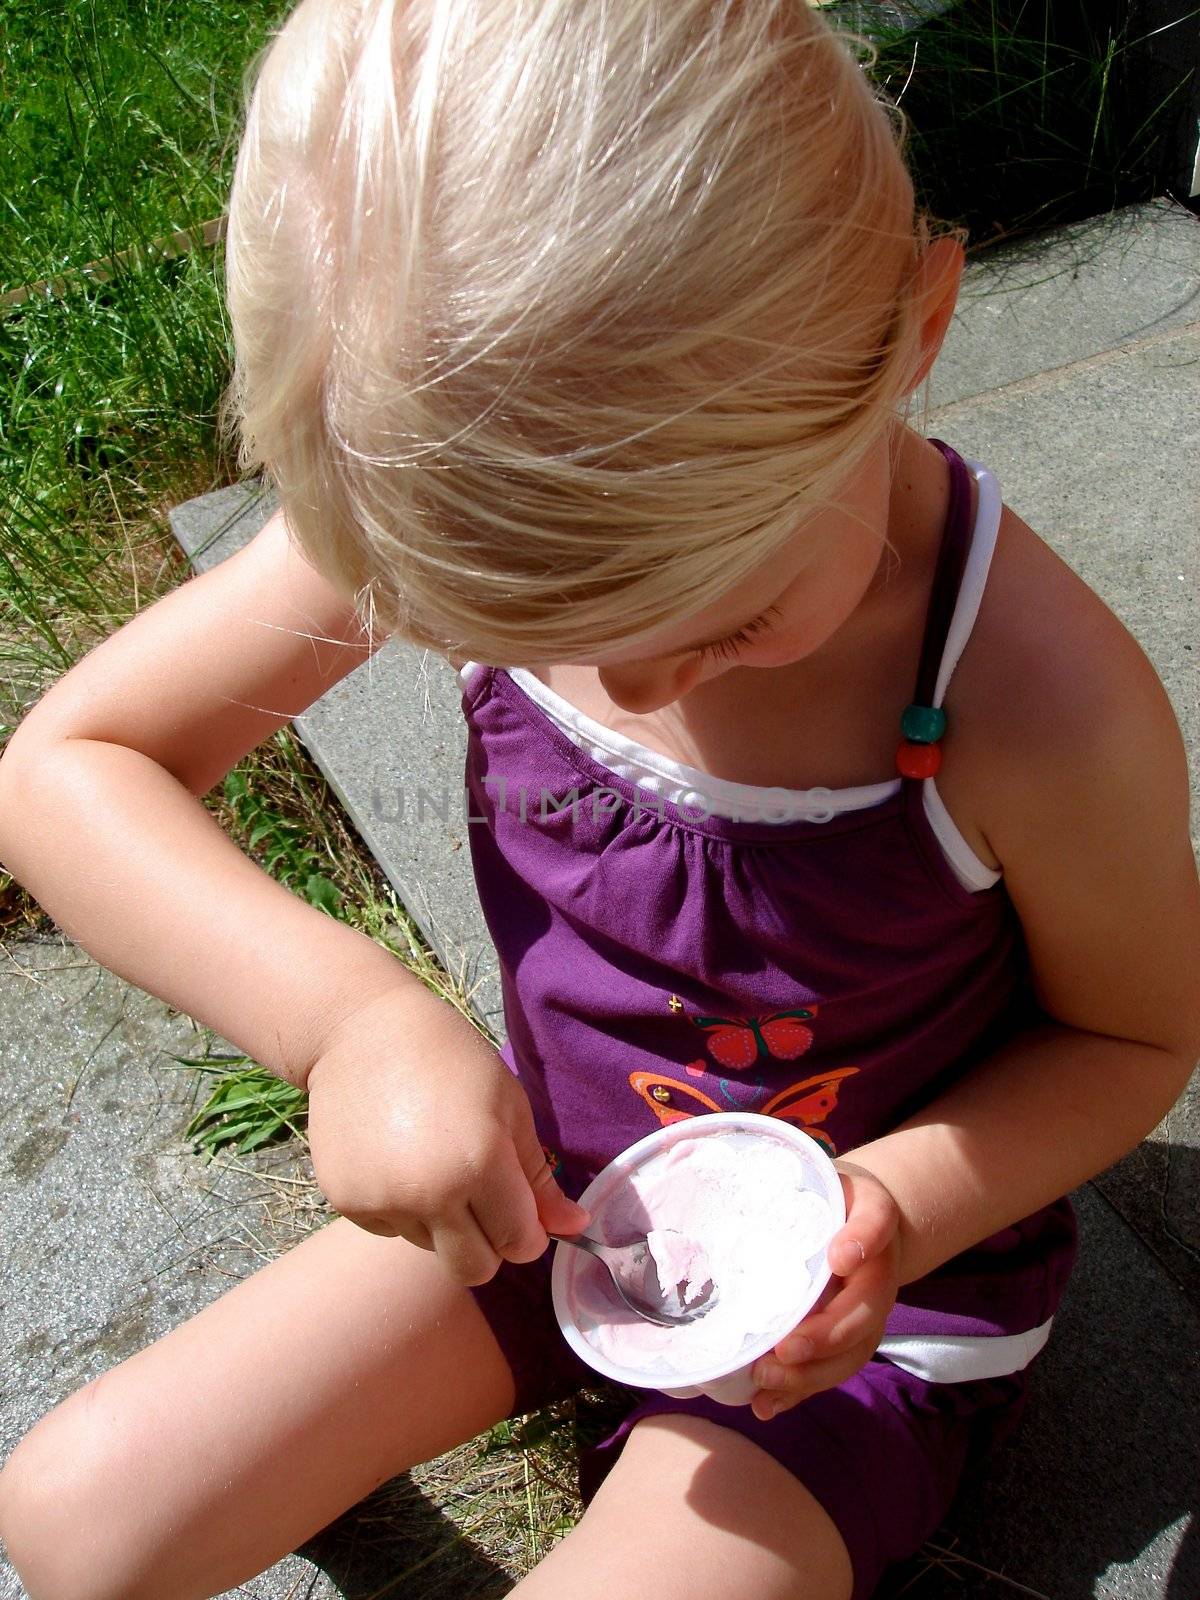 little girl eating ice cream. Please note: No negative use allowed.